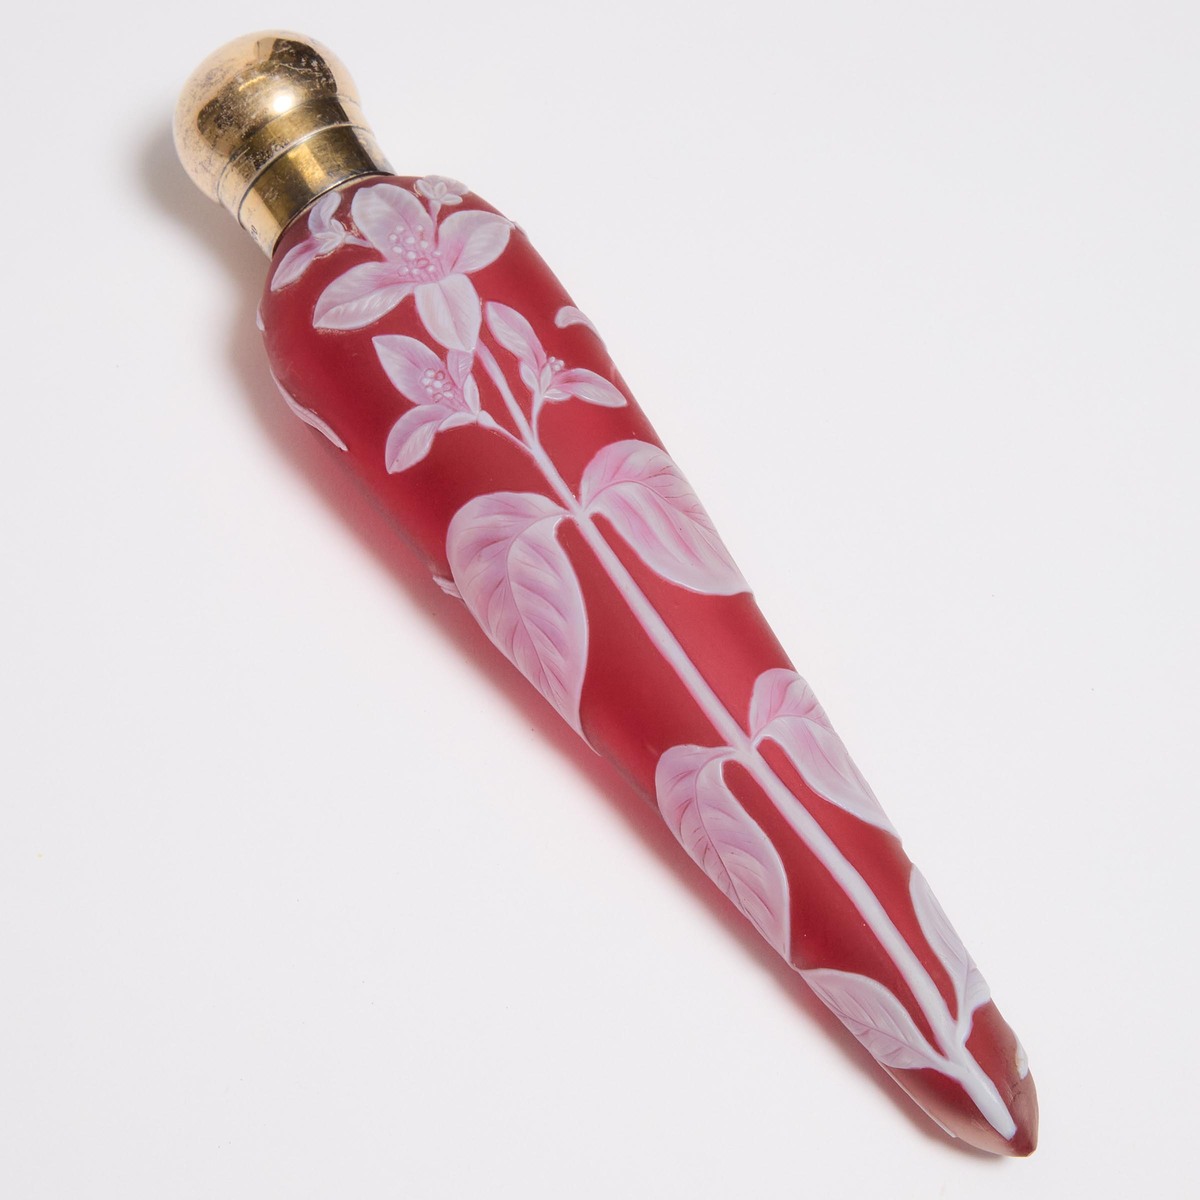 English Red Cameo Glass Perfume Bottle, probably Thomas Webb & Sons, 1880s, length 7.2 in — 18.2 cm